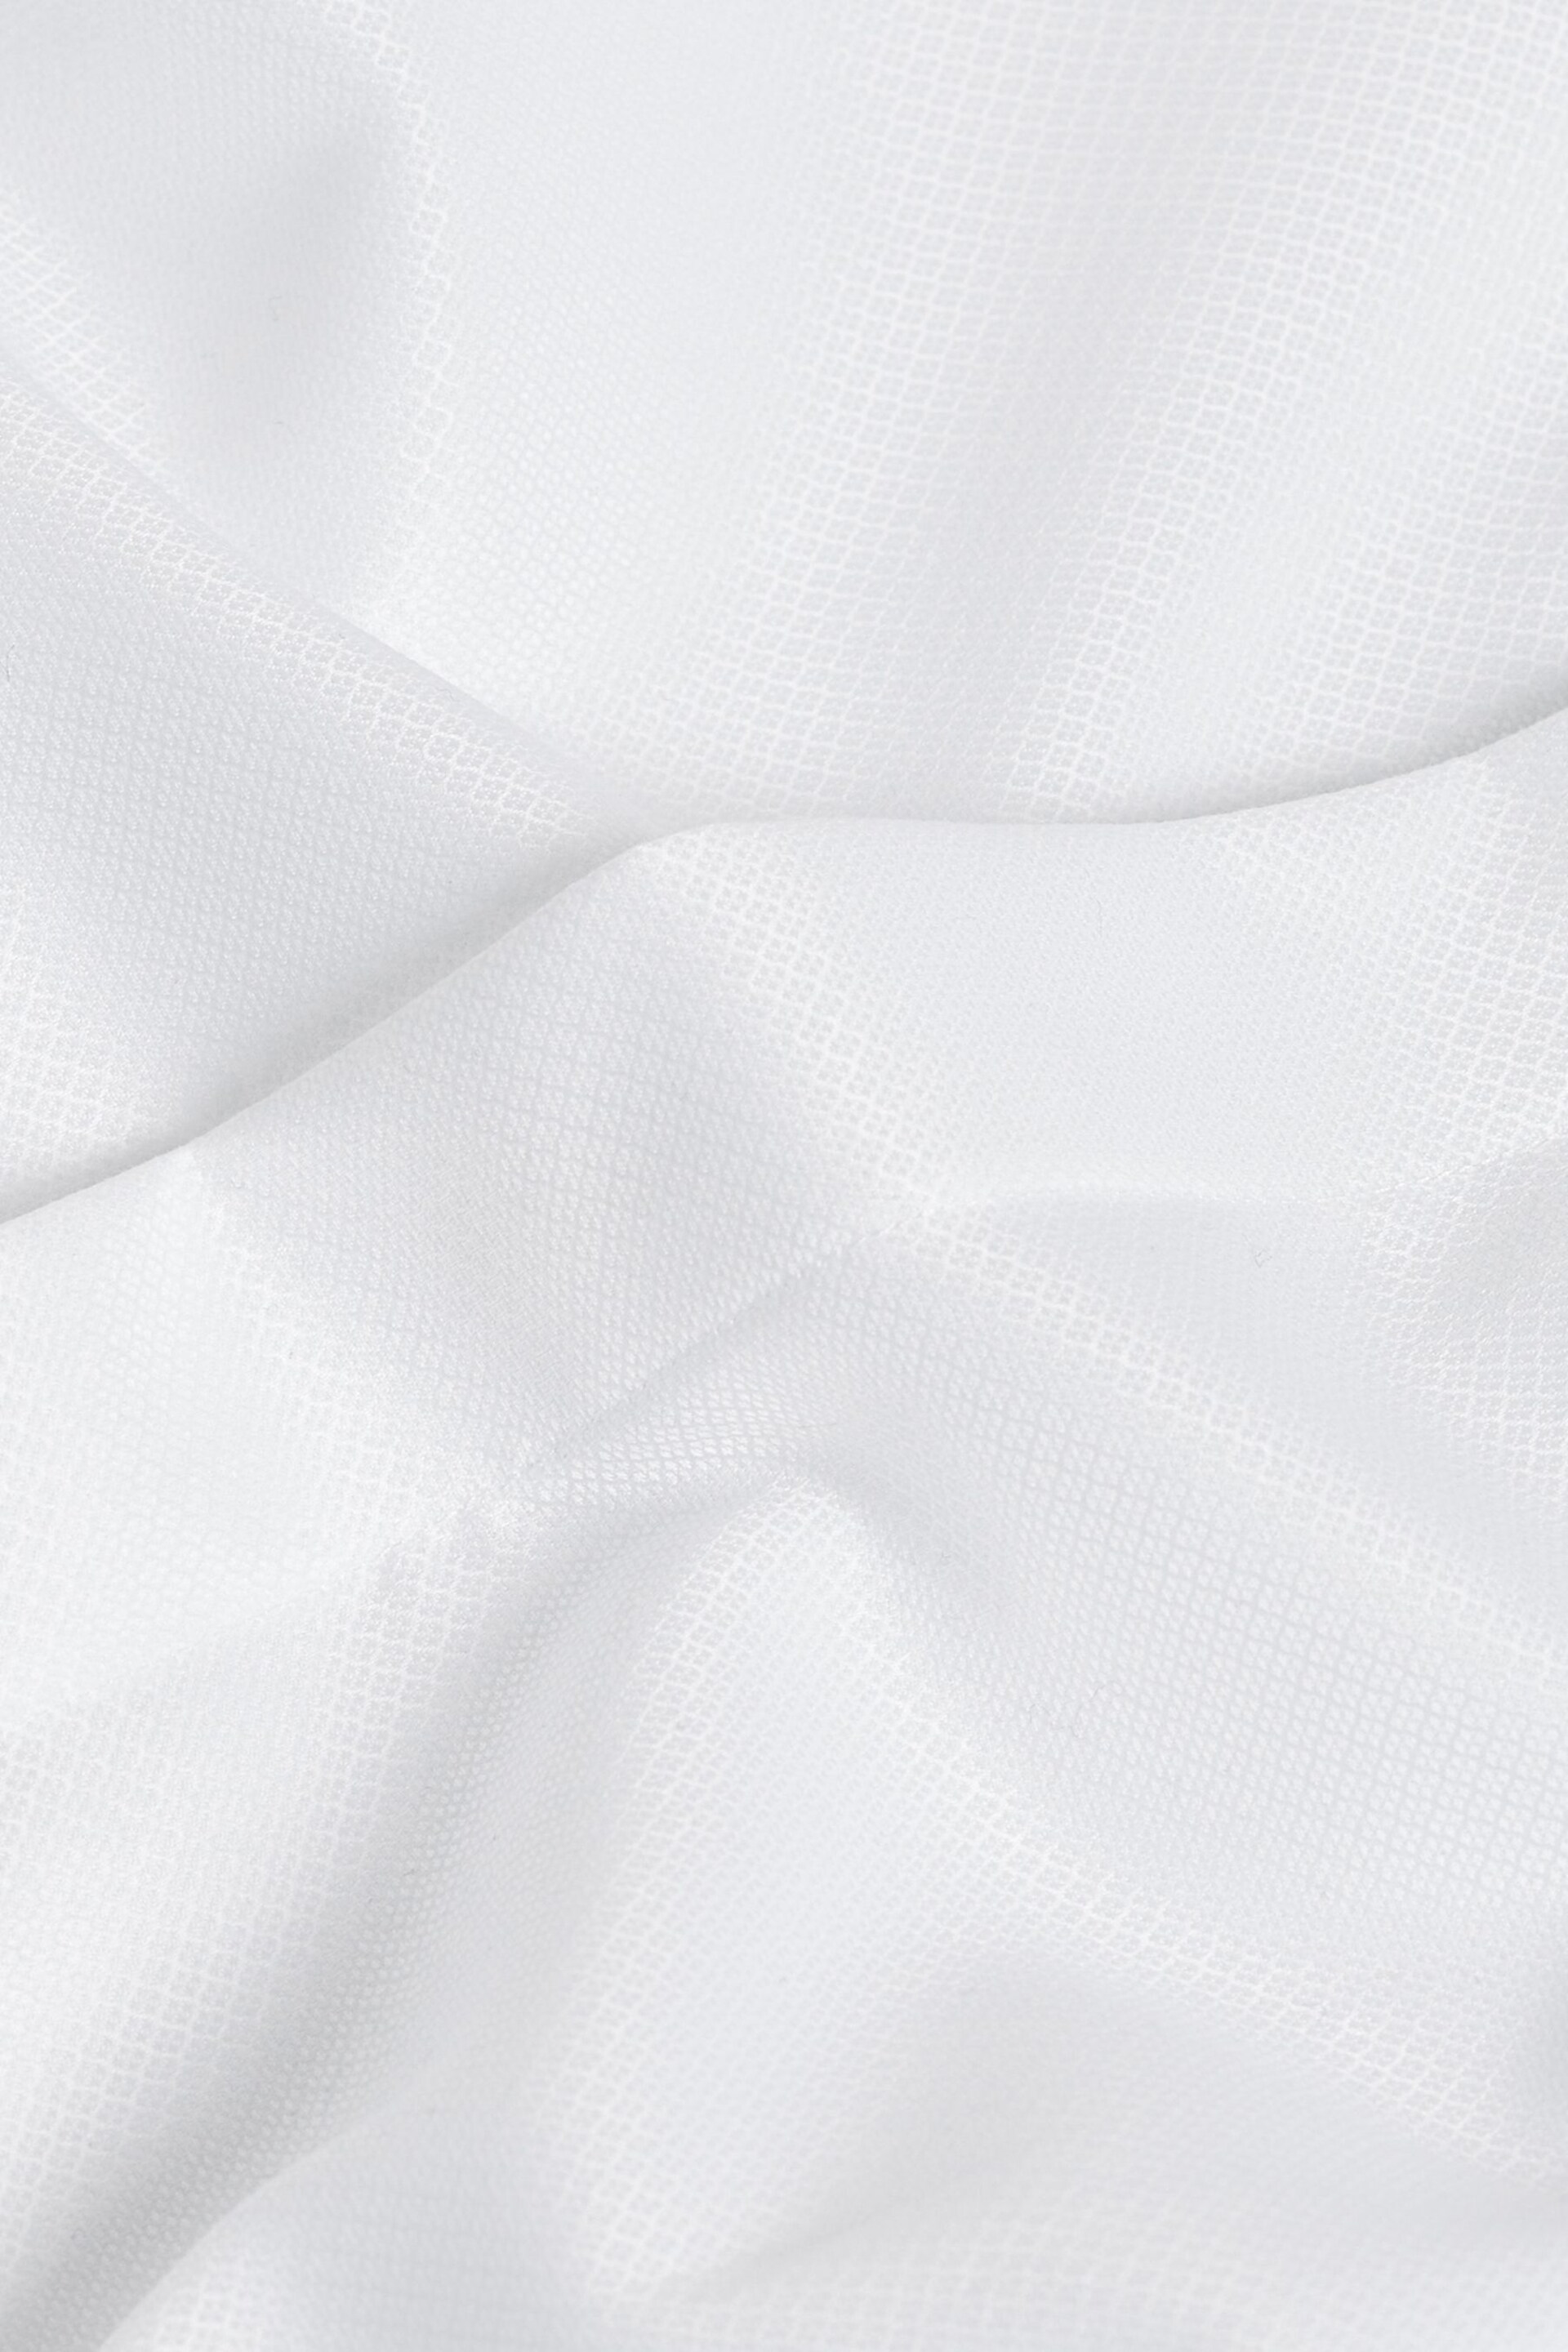 White Signature Canclini Made In Italy Double Cuff Shirt - Image 5 of 5